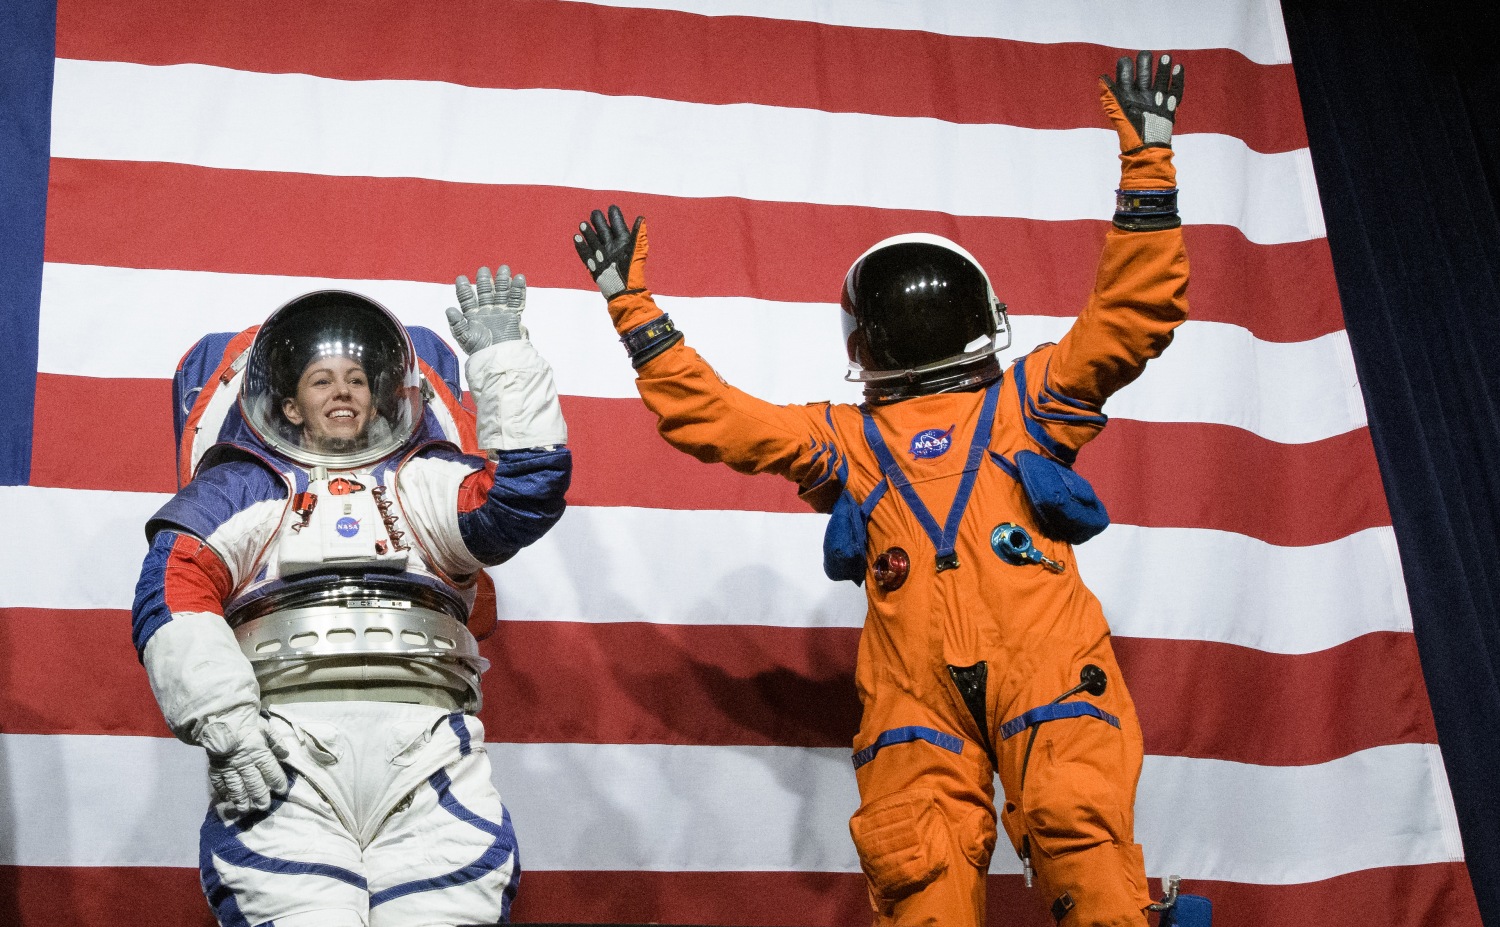 https://media-cldnry.s-nbcnews.com/image/upload/t_fit-1500w,f_auto,q_auto:best/newscms/2019_42/3054396/ss-191016-nasa-space-suit-mn-1017.jpg